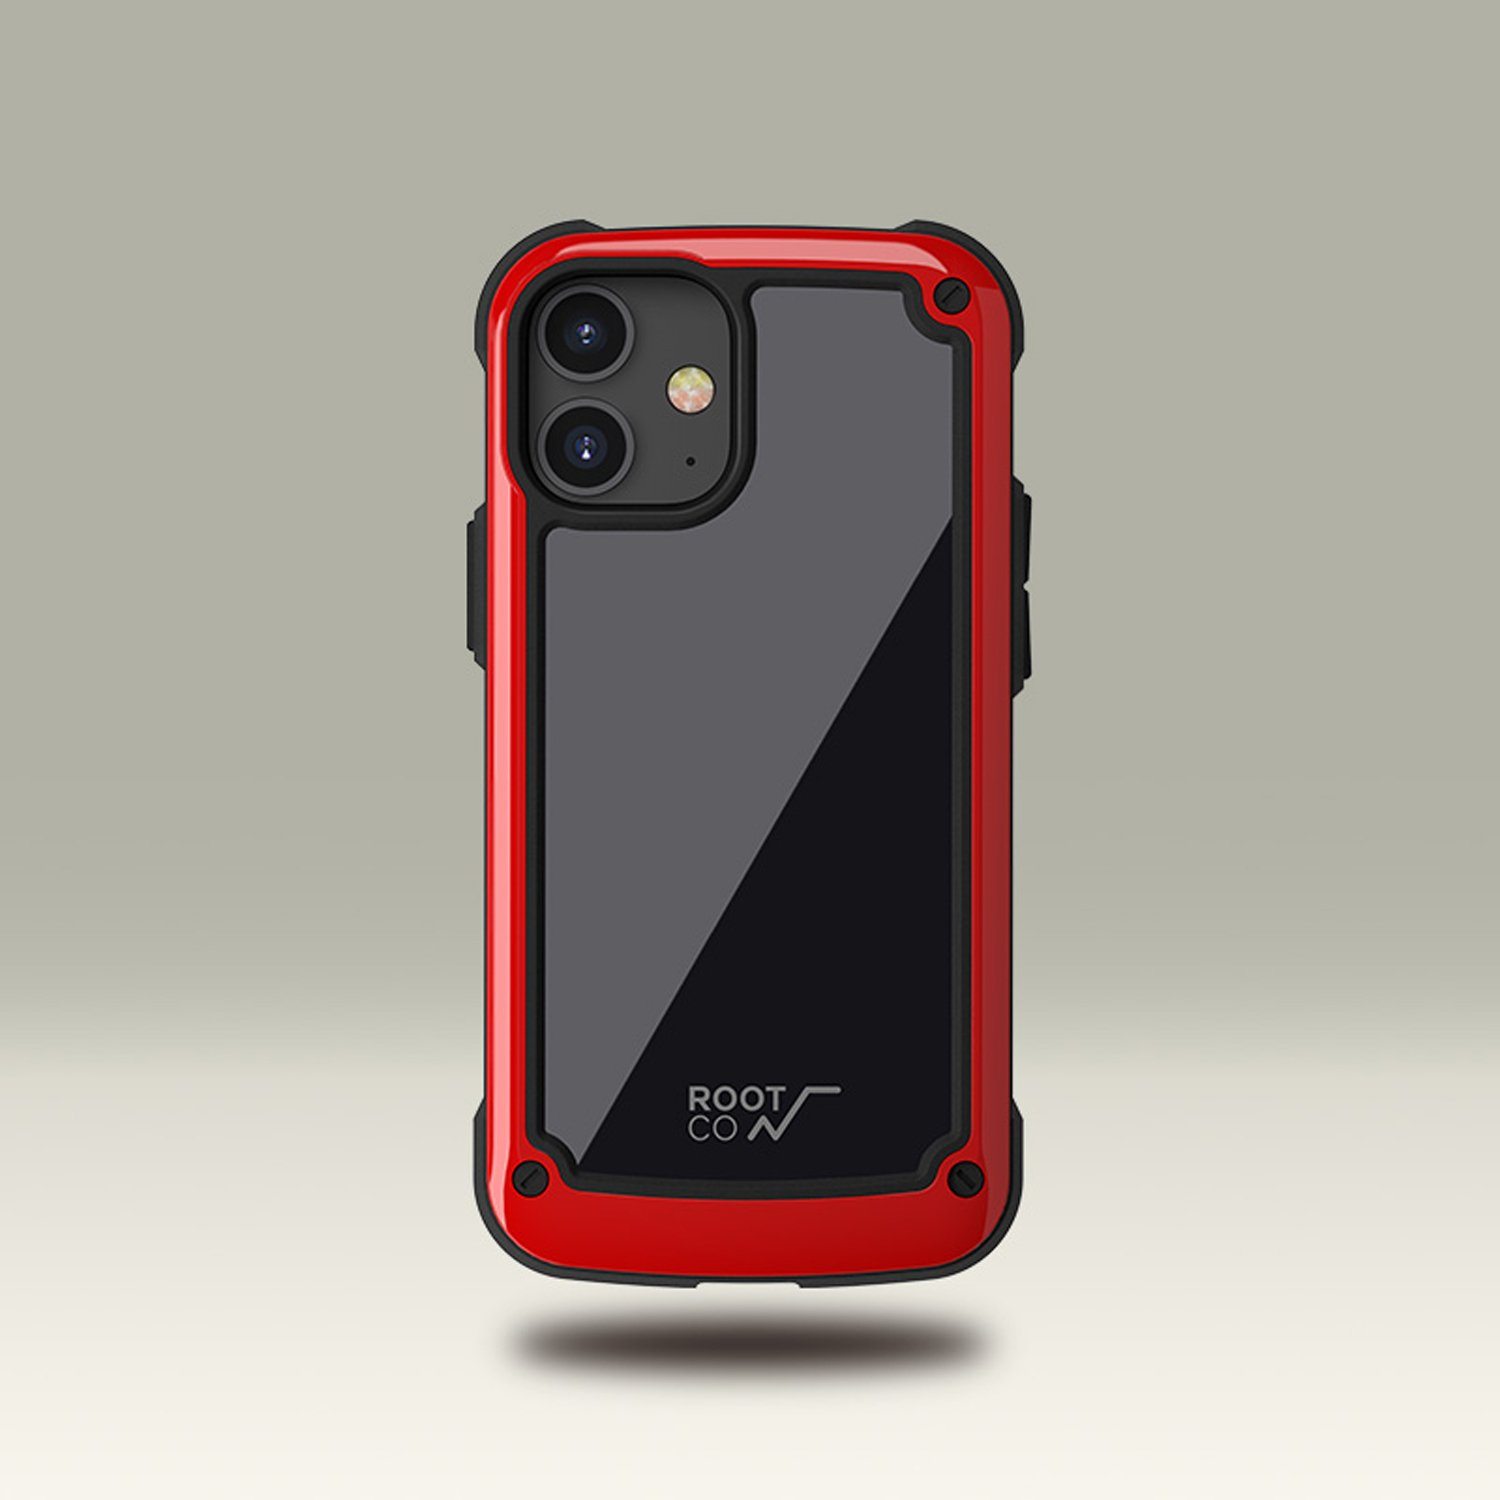 ROOT CO. Gravity Shock Resist Tough & Basic Case for iPhone 12 mini 5.4"(2020), Red Default ROOT CO. 